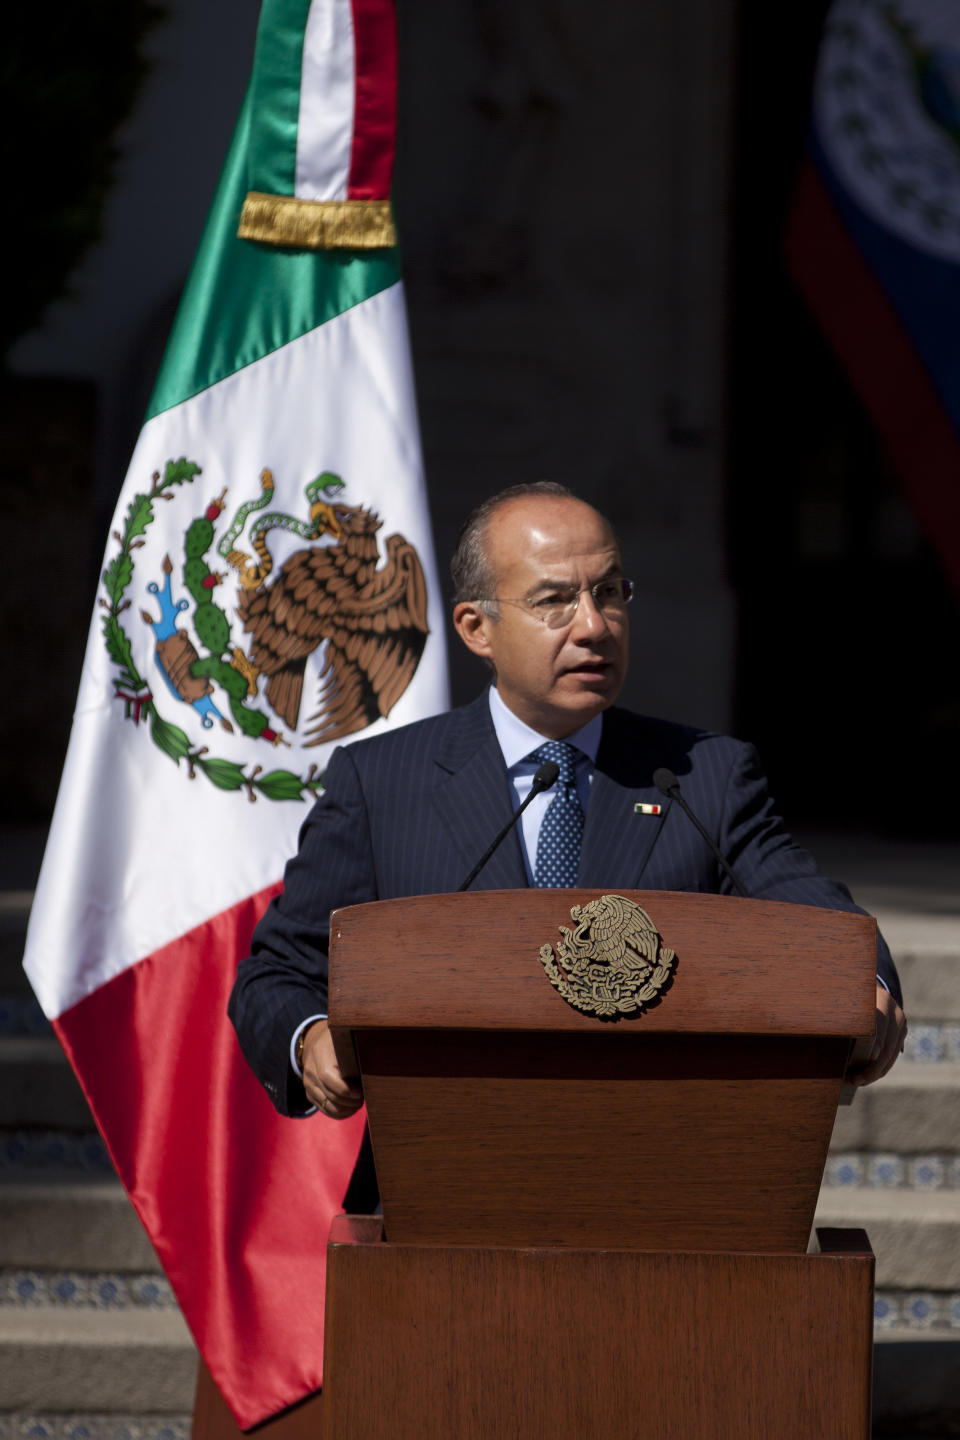 Mexico's President Felipe Calderon speaks during a press conference with the leaders of Honduras, Costa Rica and Belize, not in picture, in Mexico City, Monday, Nov. 12, 2012. Mexico and the three Central American nations are calling for a review of international drug policies after two U.S. states voted to legalize recreational use of marijuana. (AP Photo/Alexandre Meneghini)